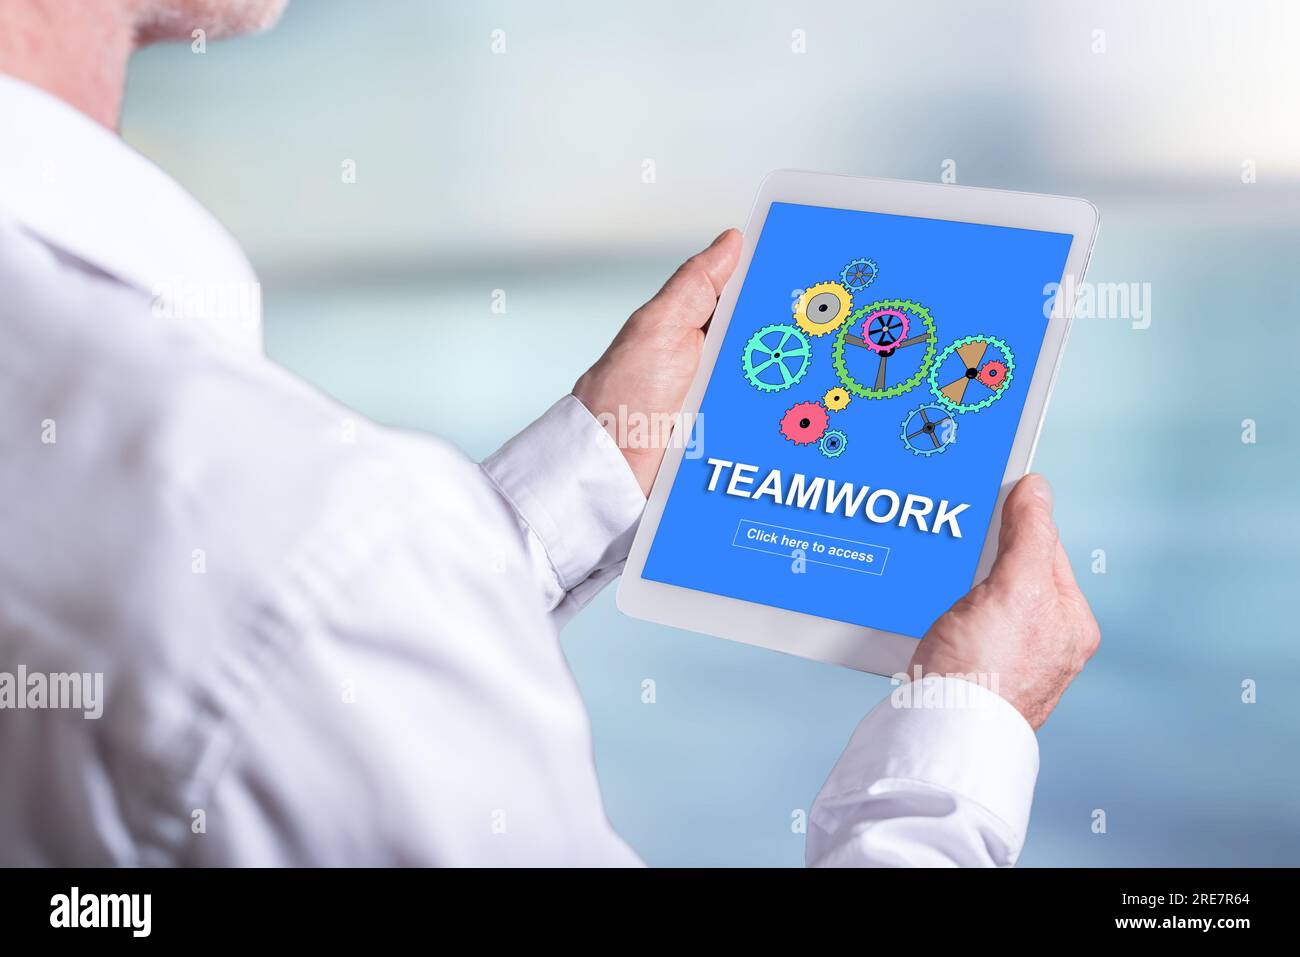 Tablet screen displaying a teamwork concept Stock Photo